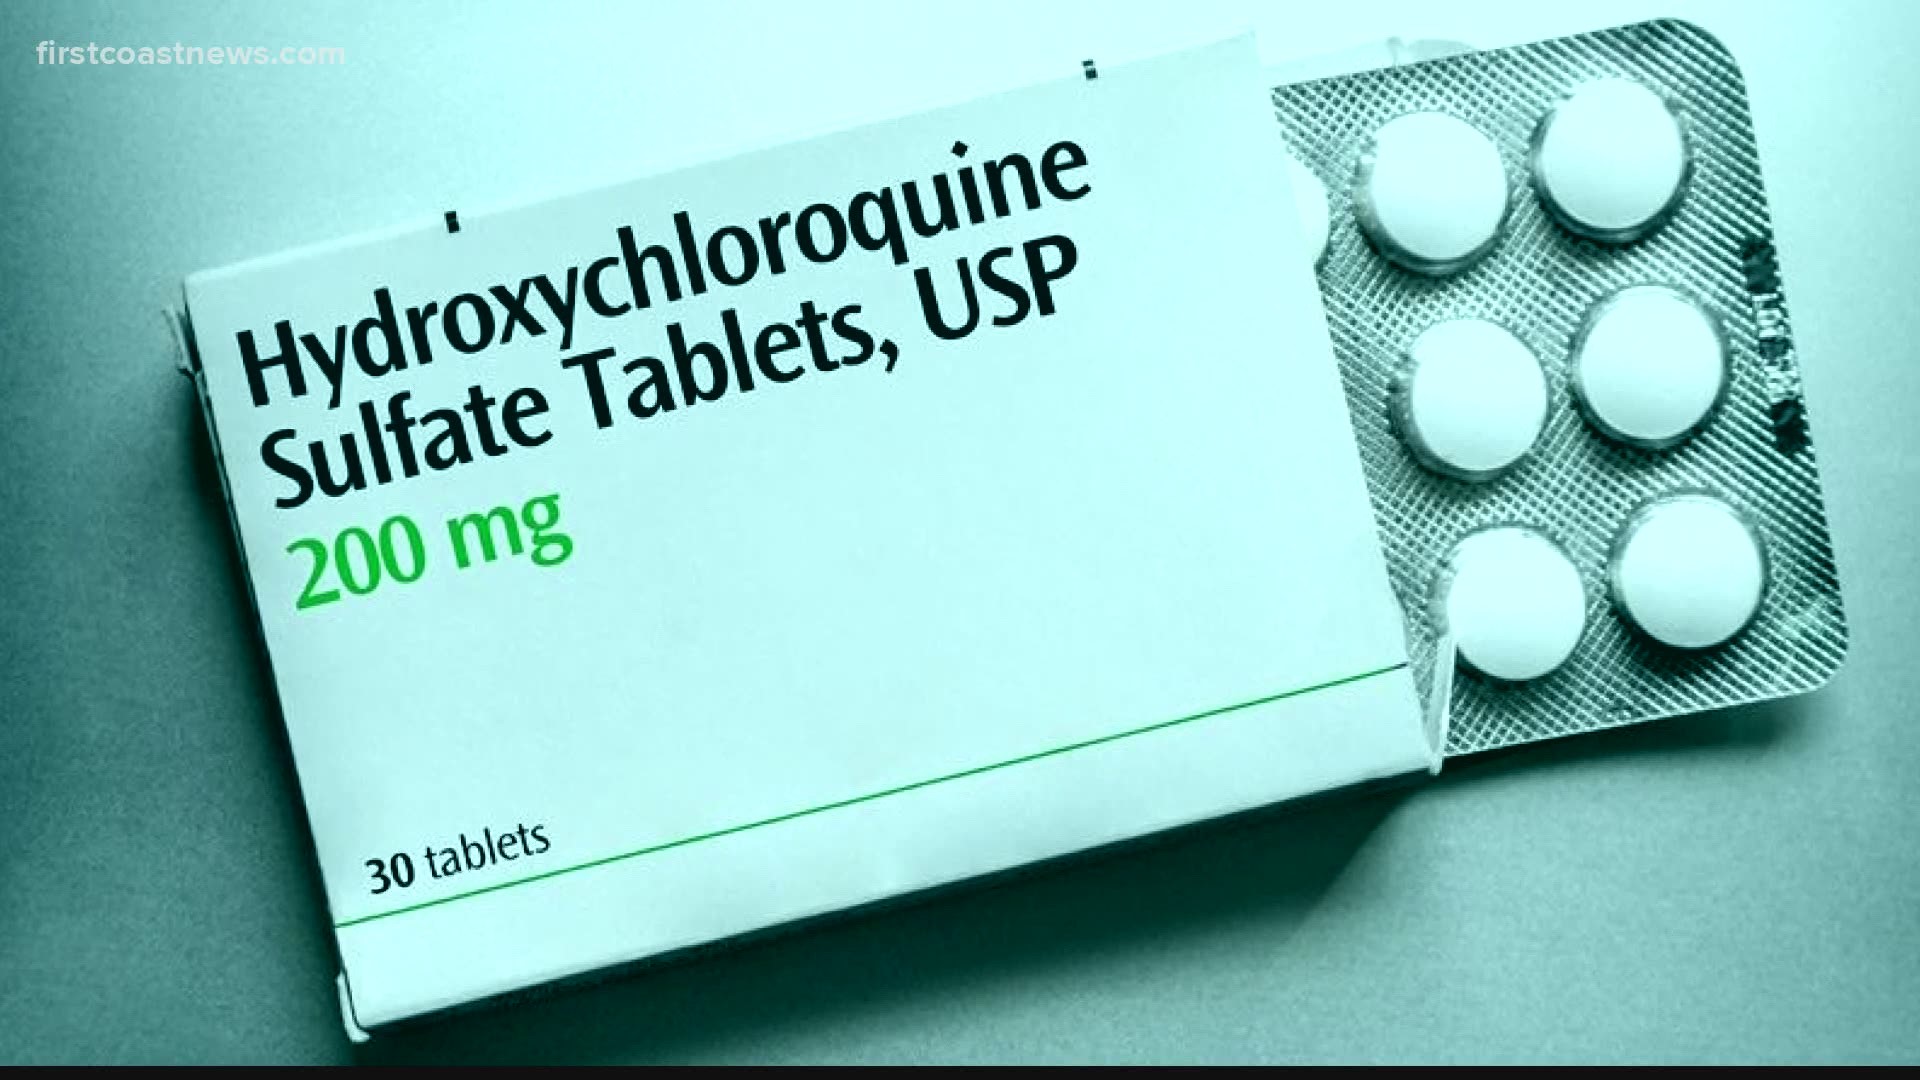 The FDA has allowed the emergency use of hydroxychloroquine, which has been used to treat patients with malaria and lupus.